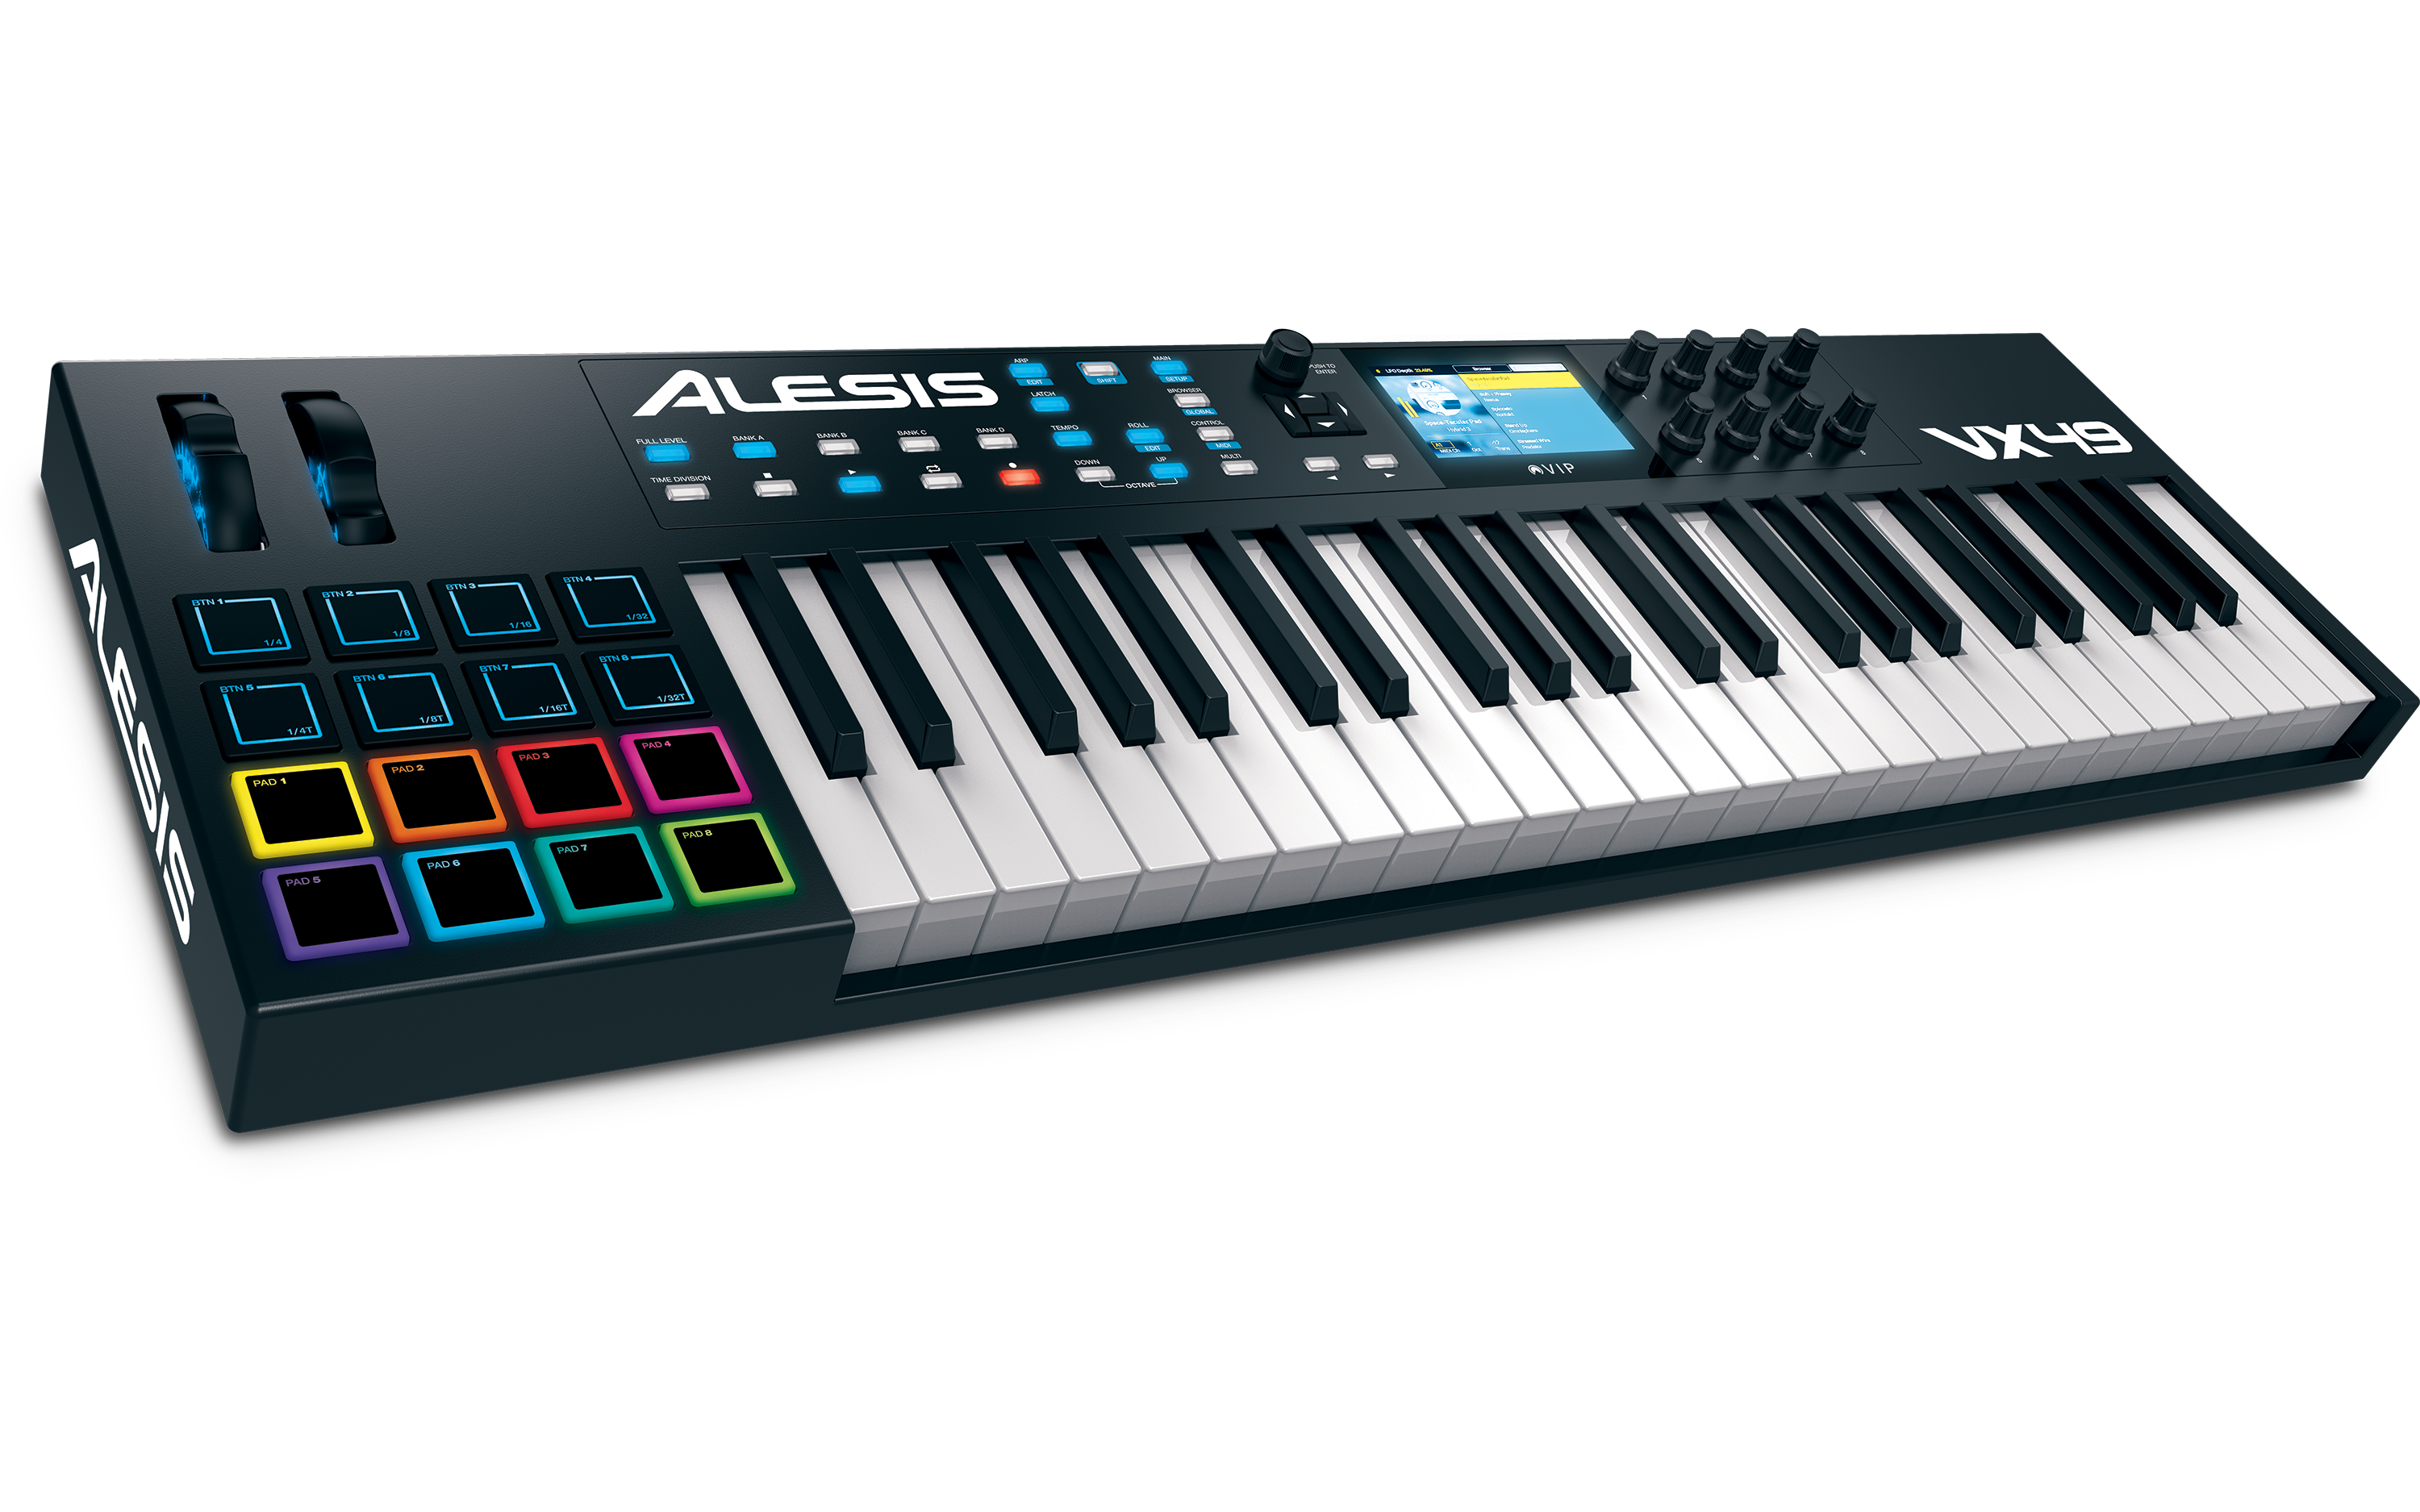 Alesis VX49 Fully Integrated MIDI Controller Keyboard